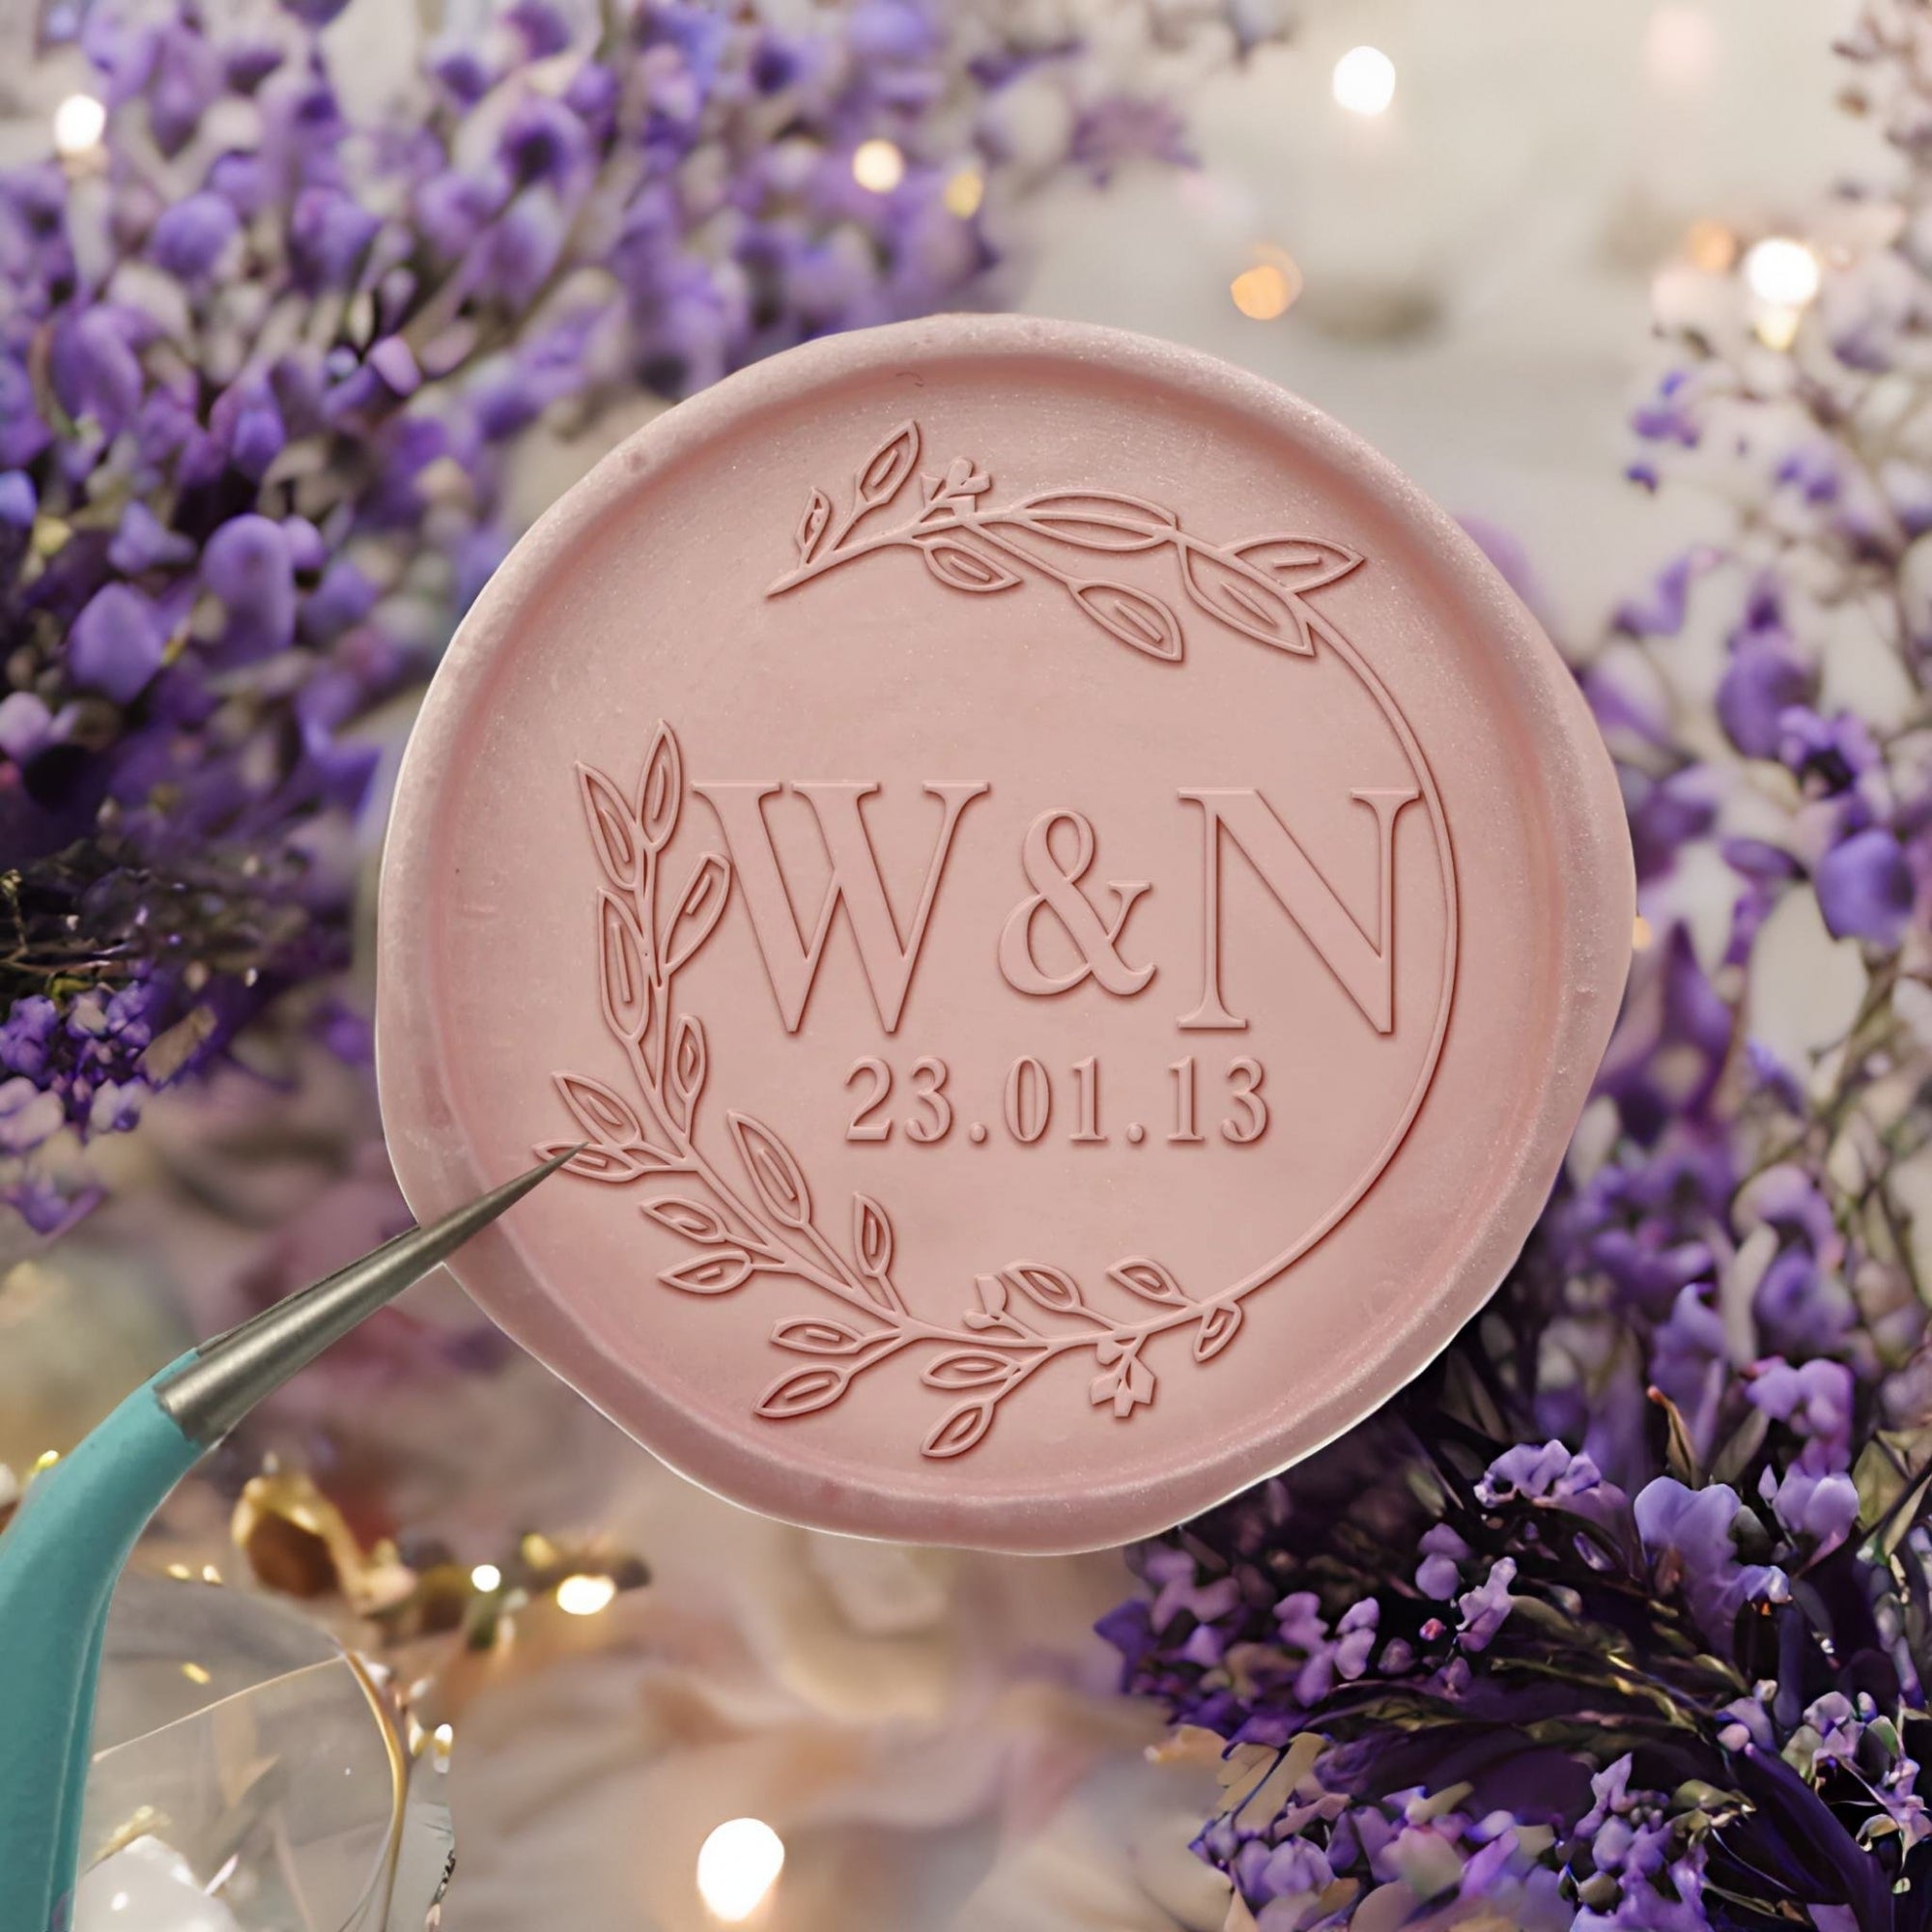 Leaf Circle Double Initials Wedding Custom Self-Adhesive Wax Seal Stickers  - Personalized Elegance for Invitations, Favors, and More